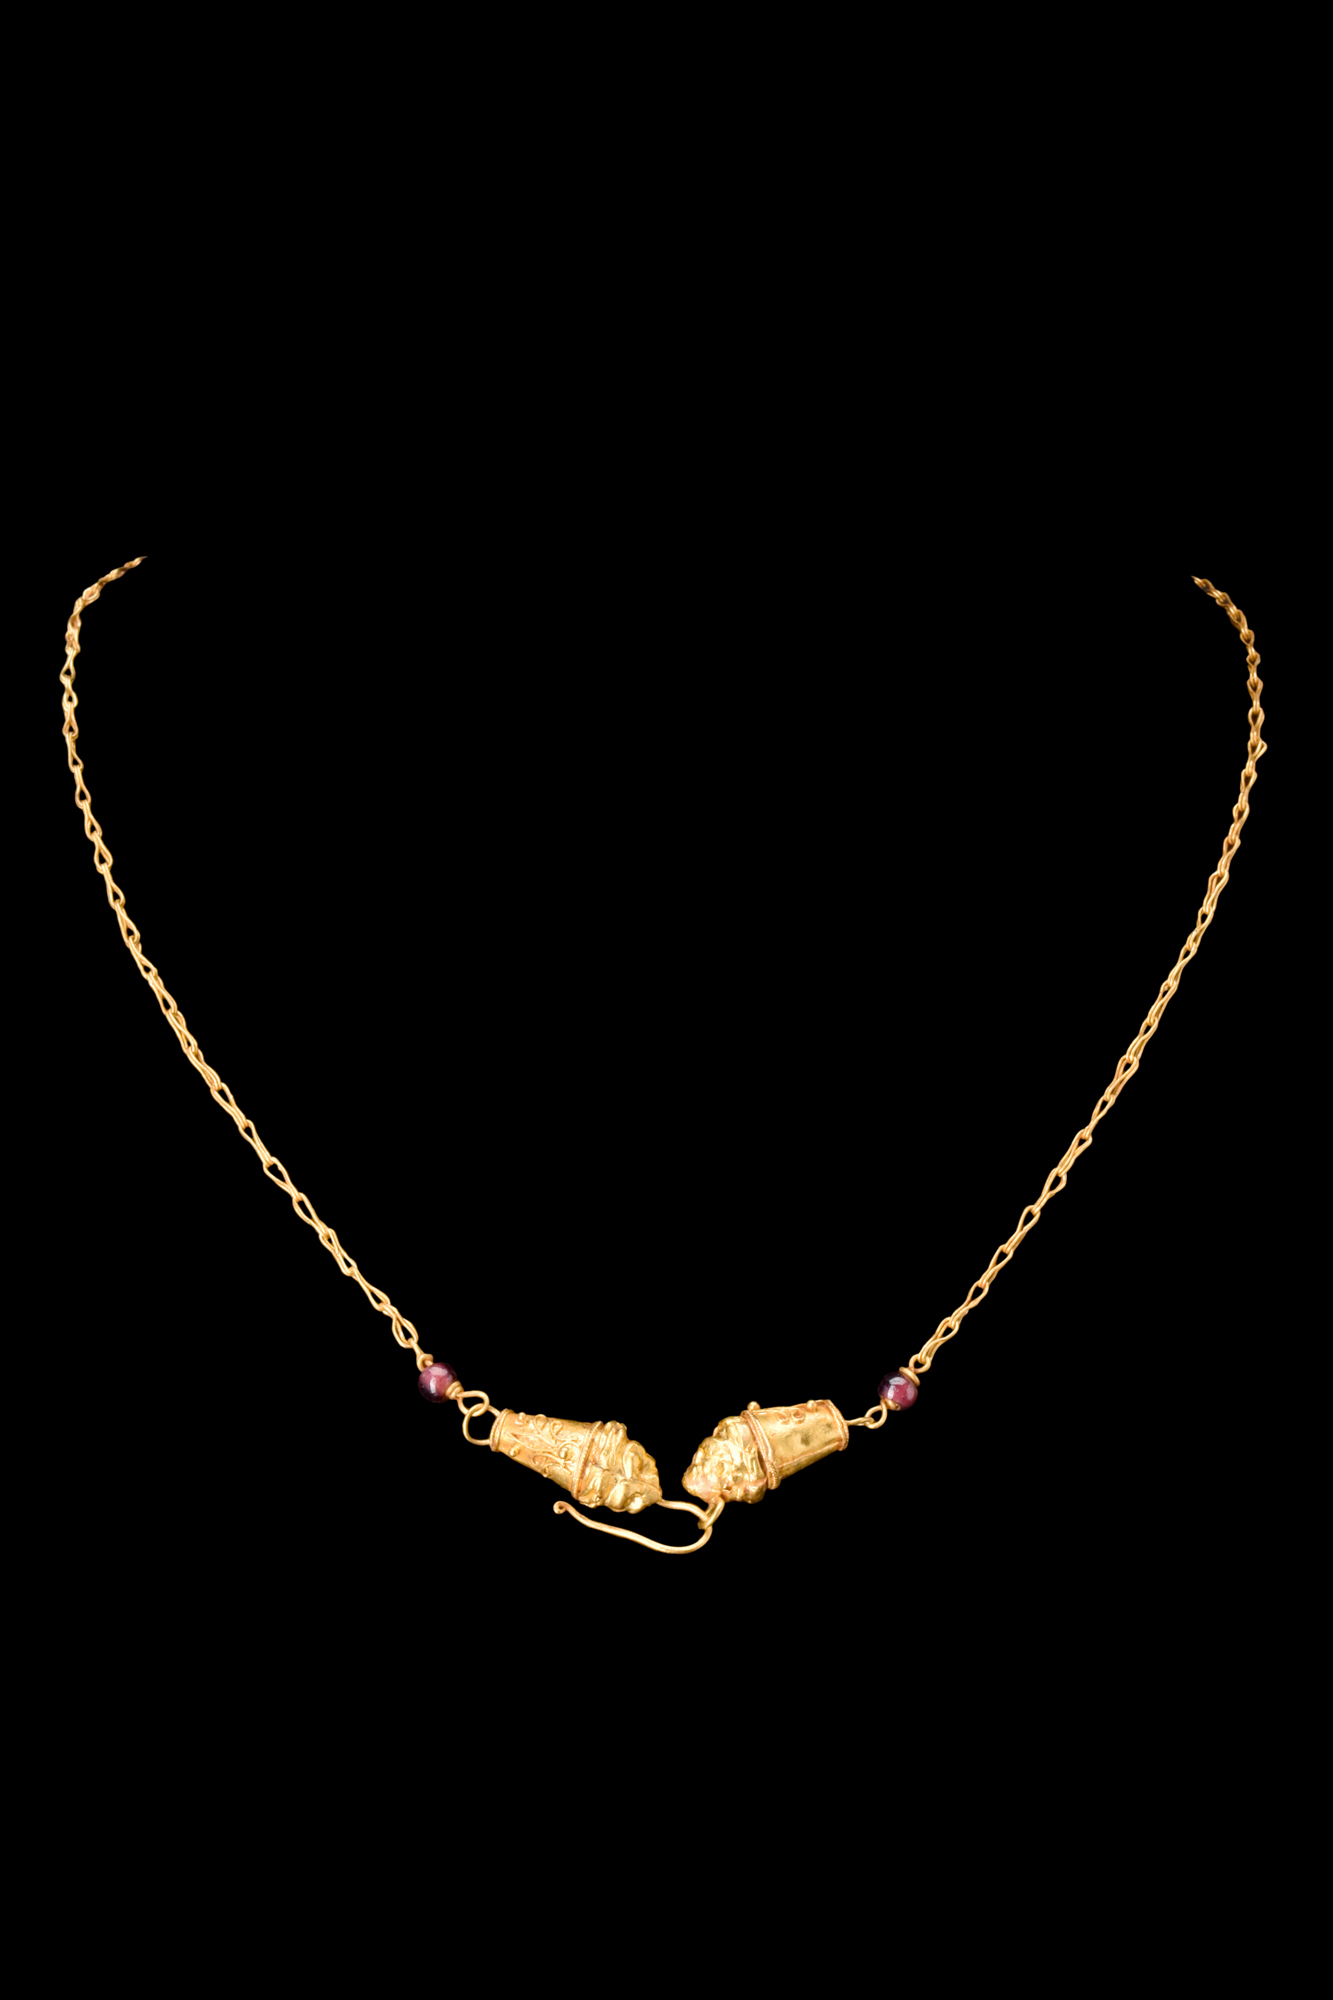 HELLENISTIC GOLD CHAIN WITH LION HEAD FINIALS